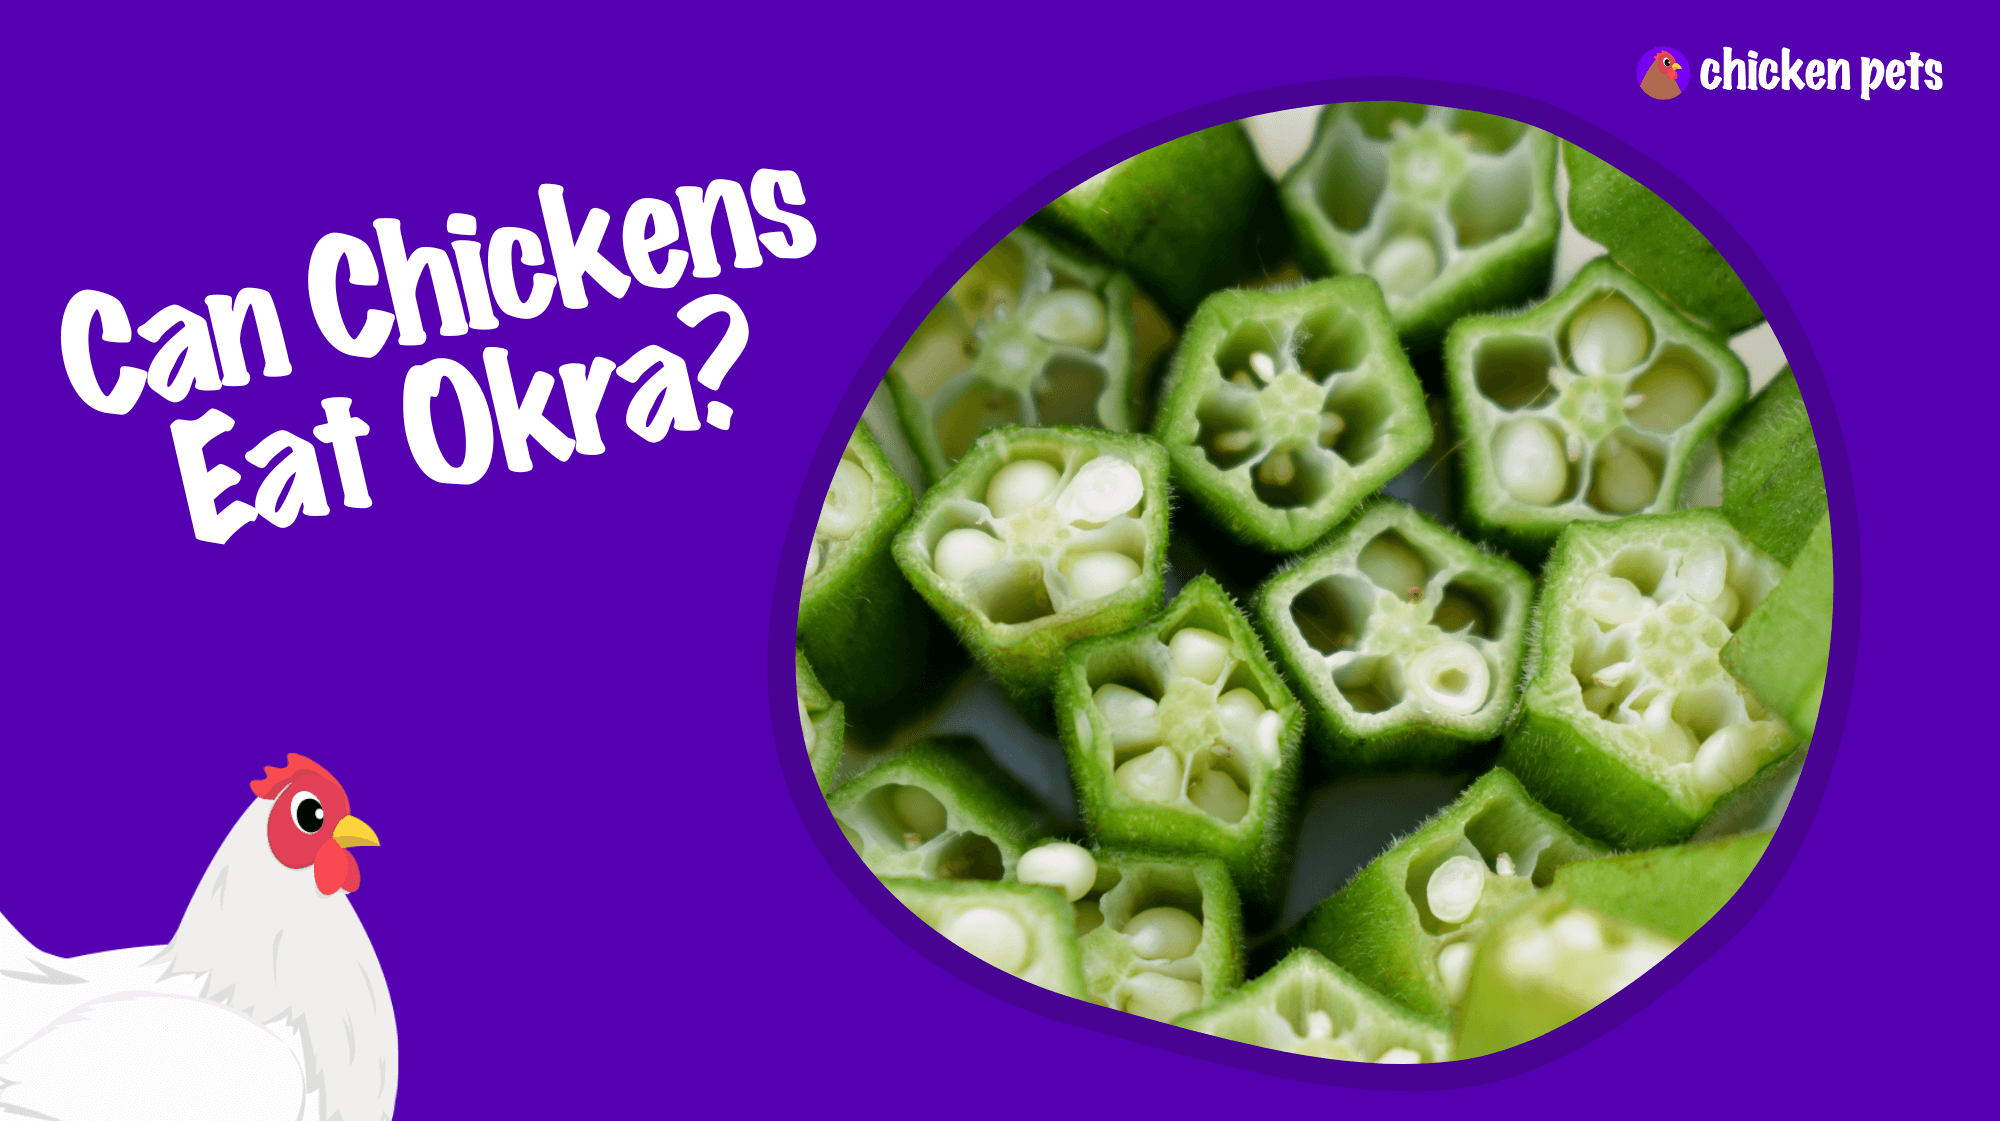 Can chickens eat okra